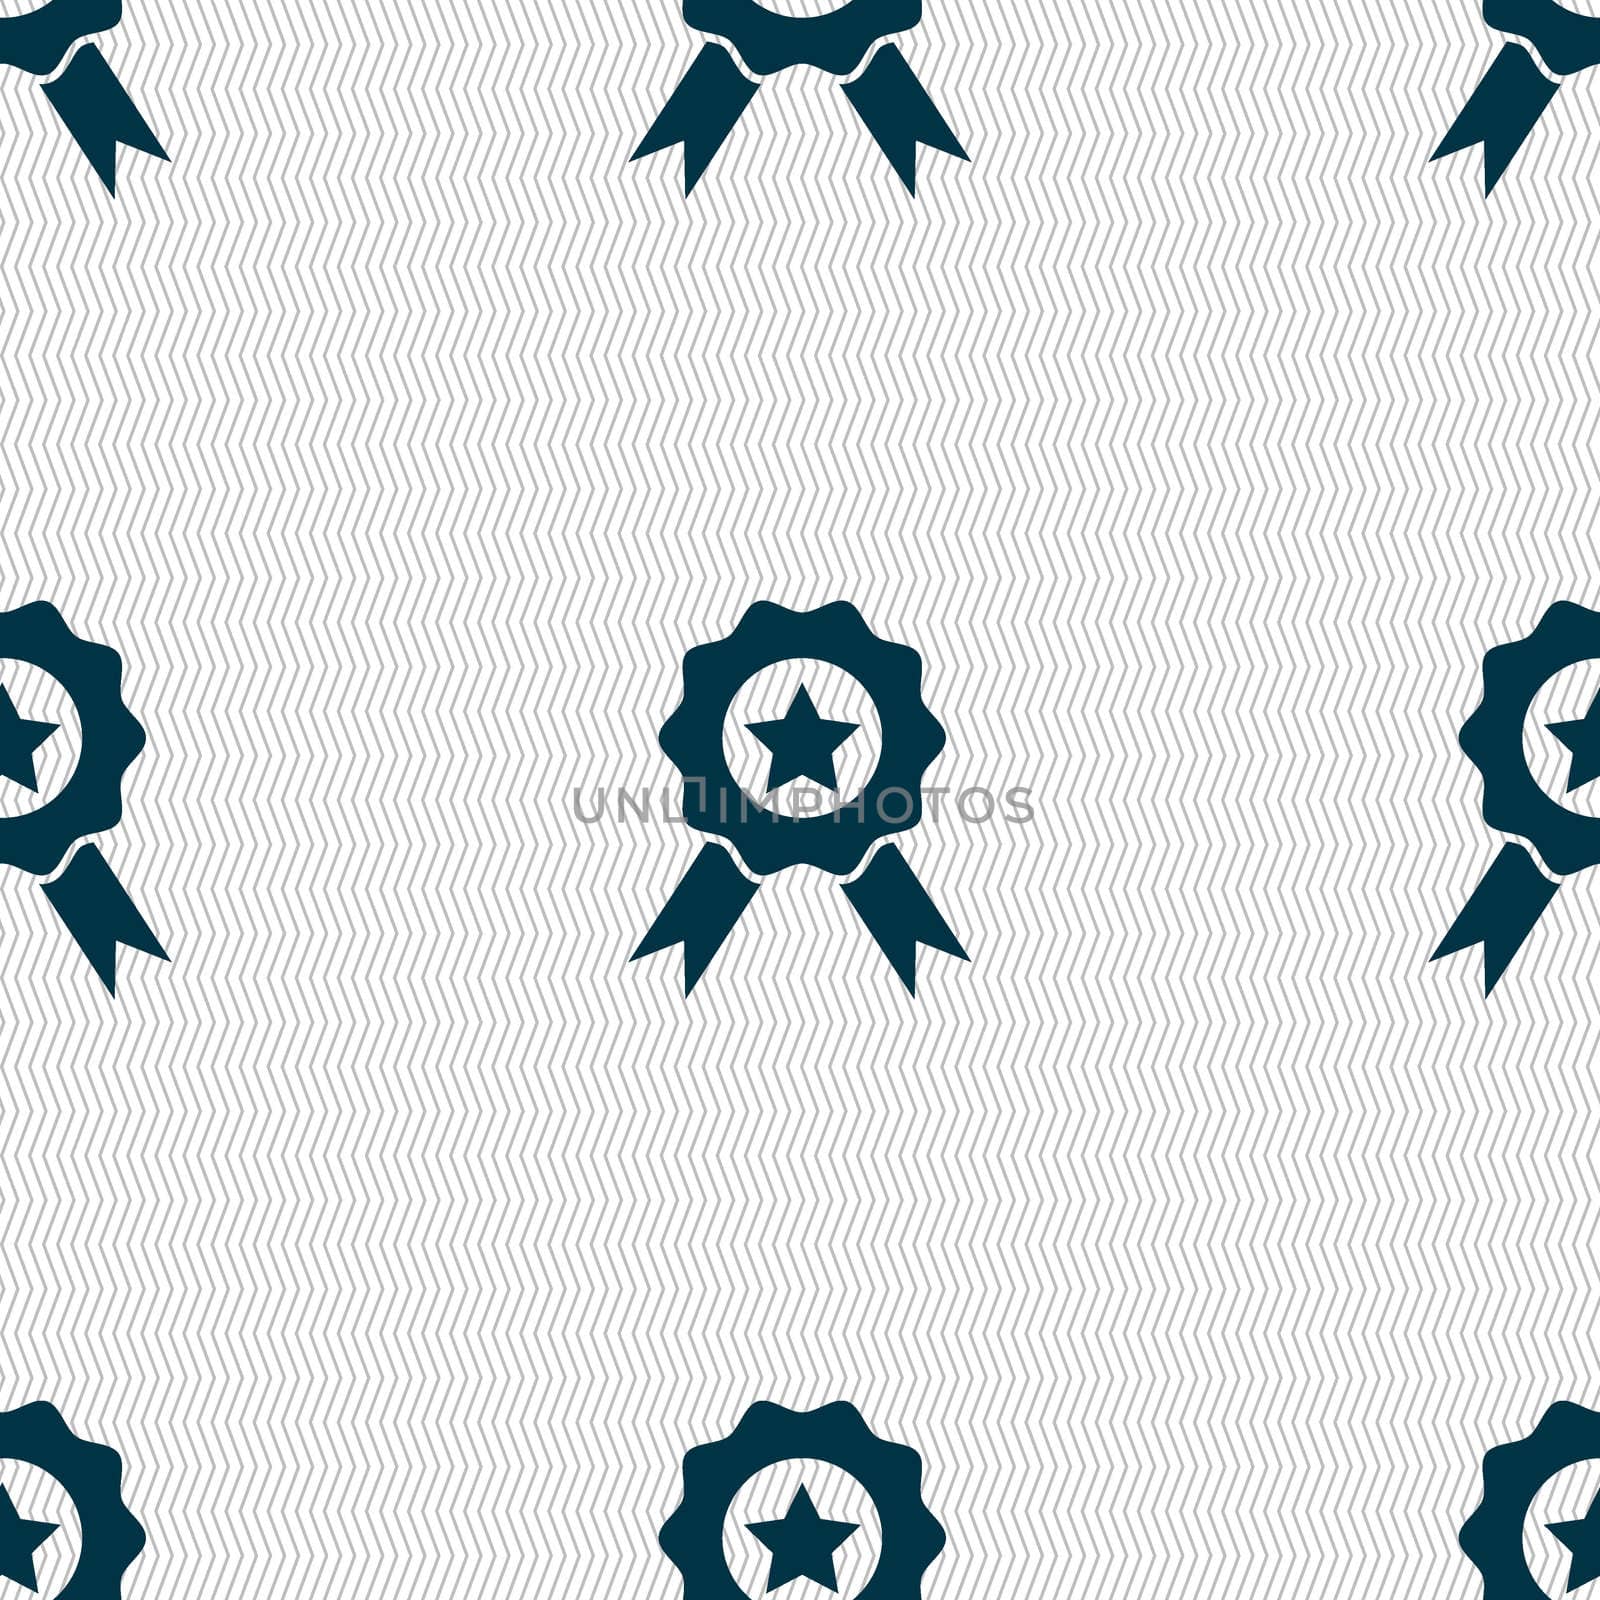 Award, Medal of Honor icon sign. Seamless abstract background with geometric shapes.  by serhii_lohvyniuk